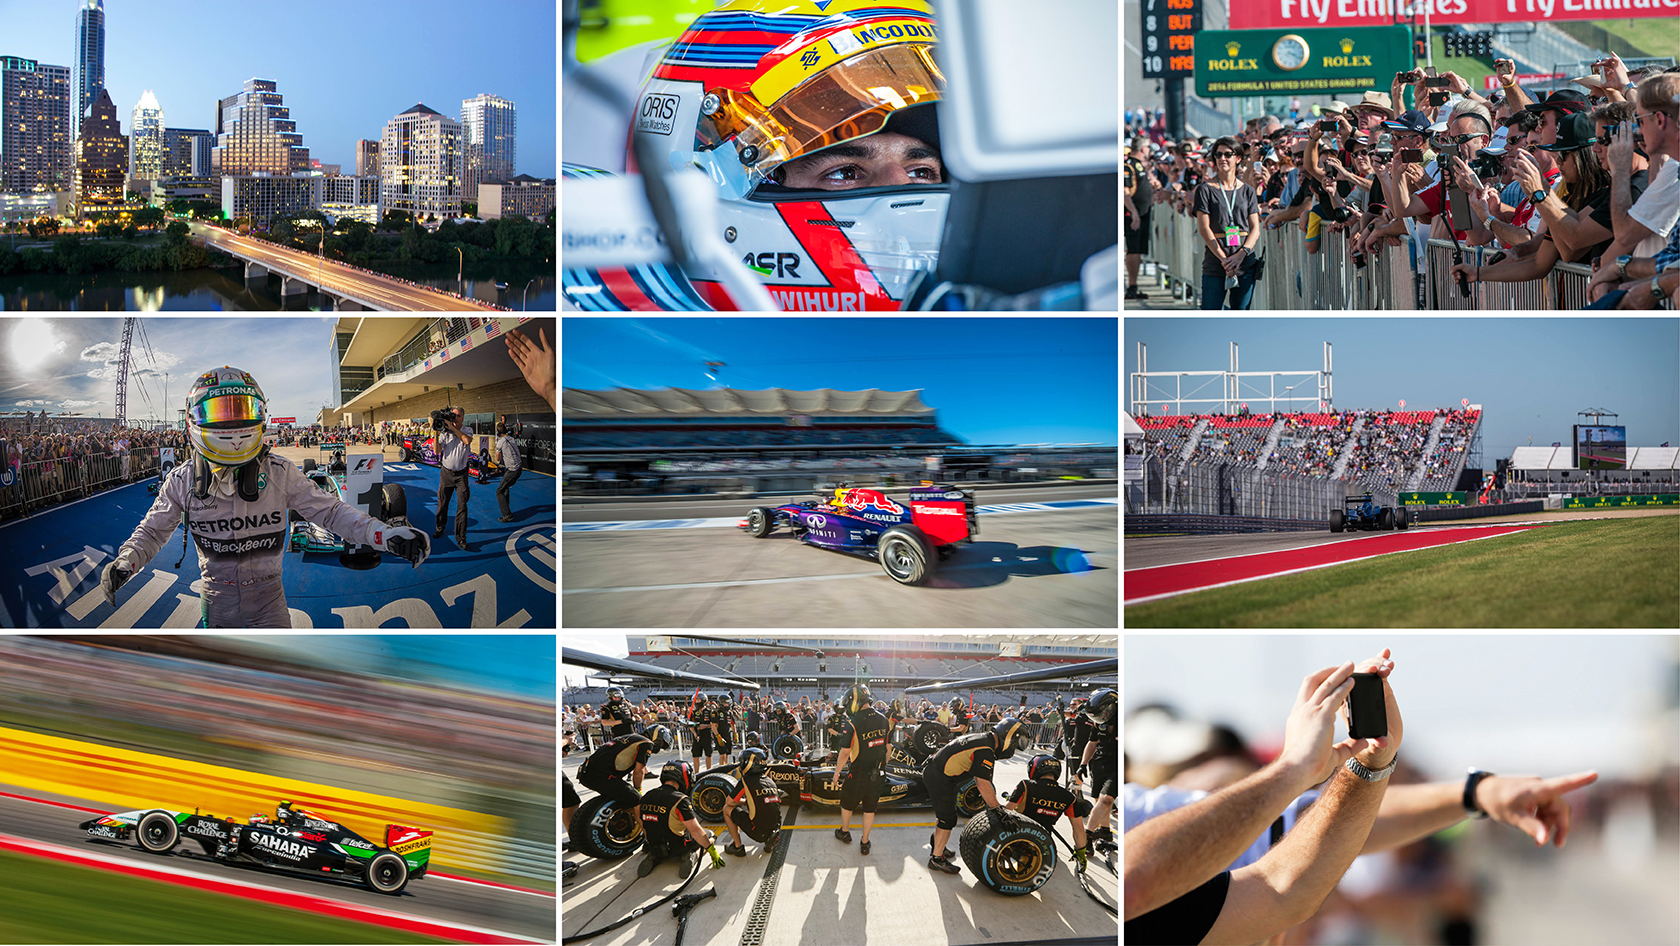 F1 fans becoming younger and more diverse, say Global Survey results